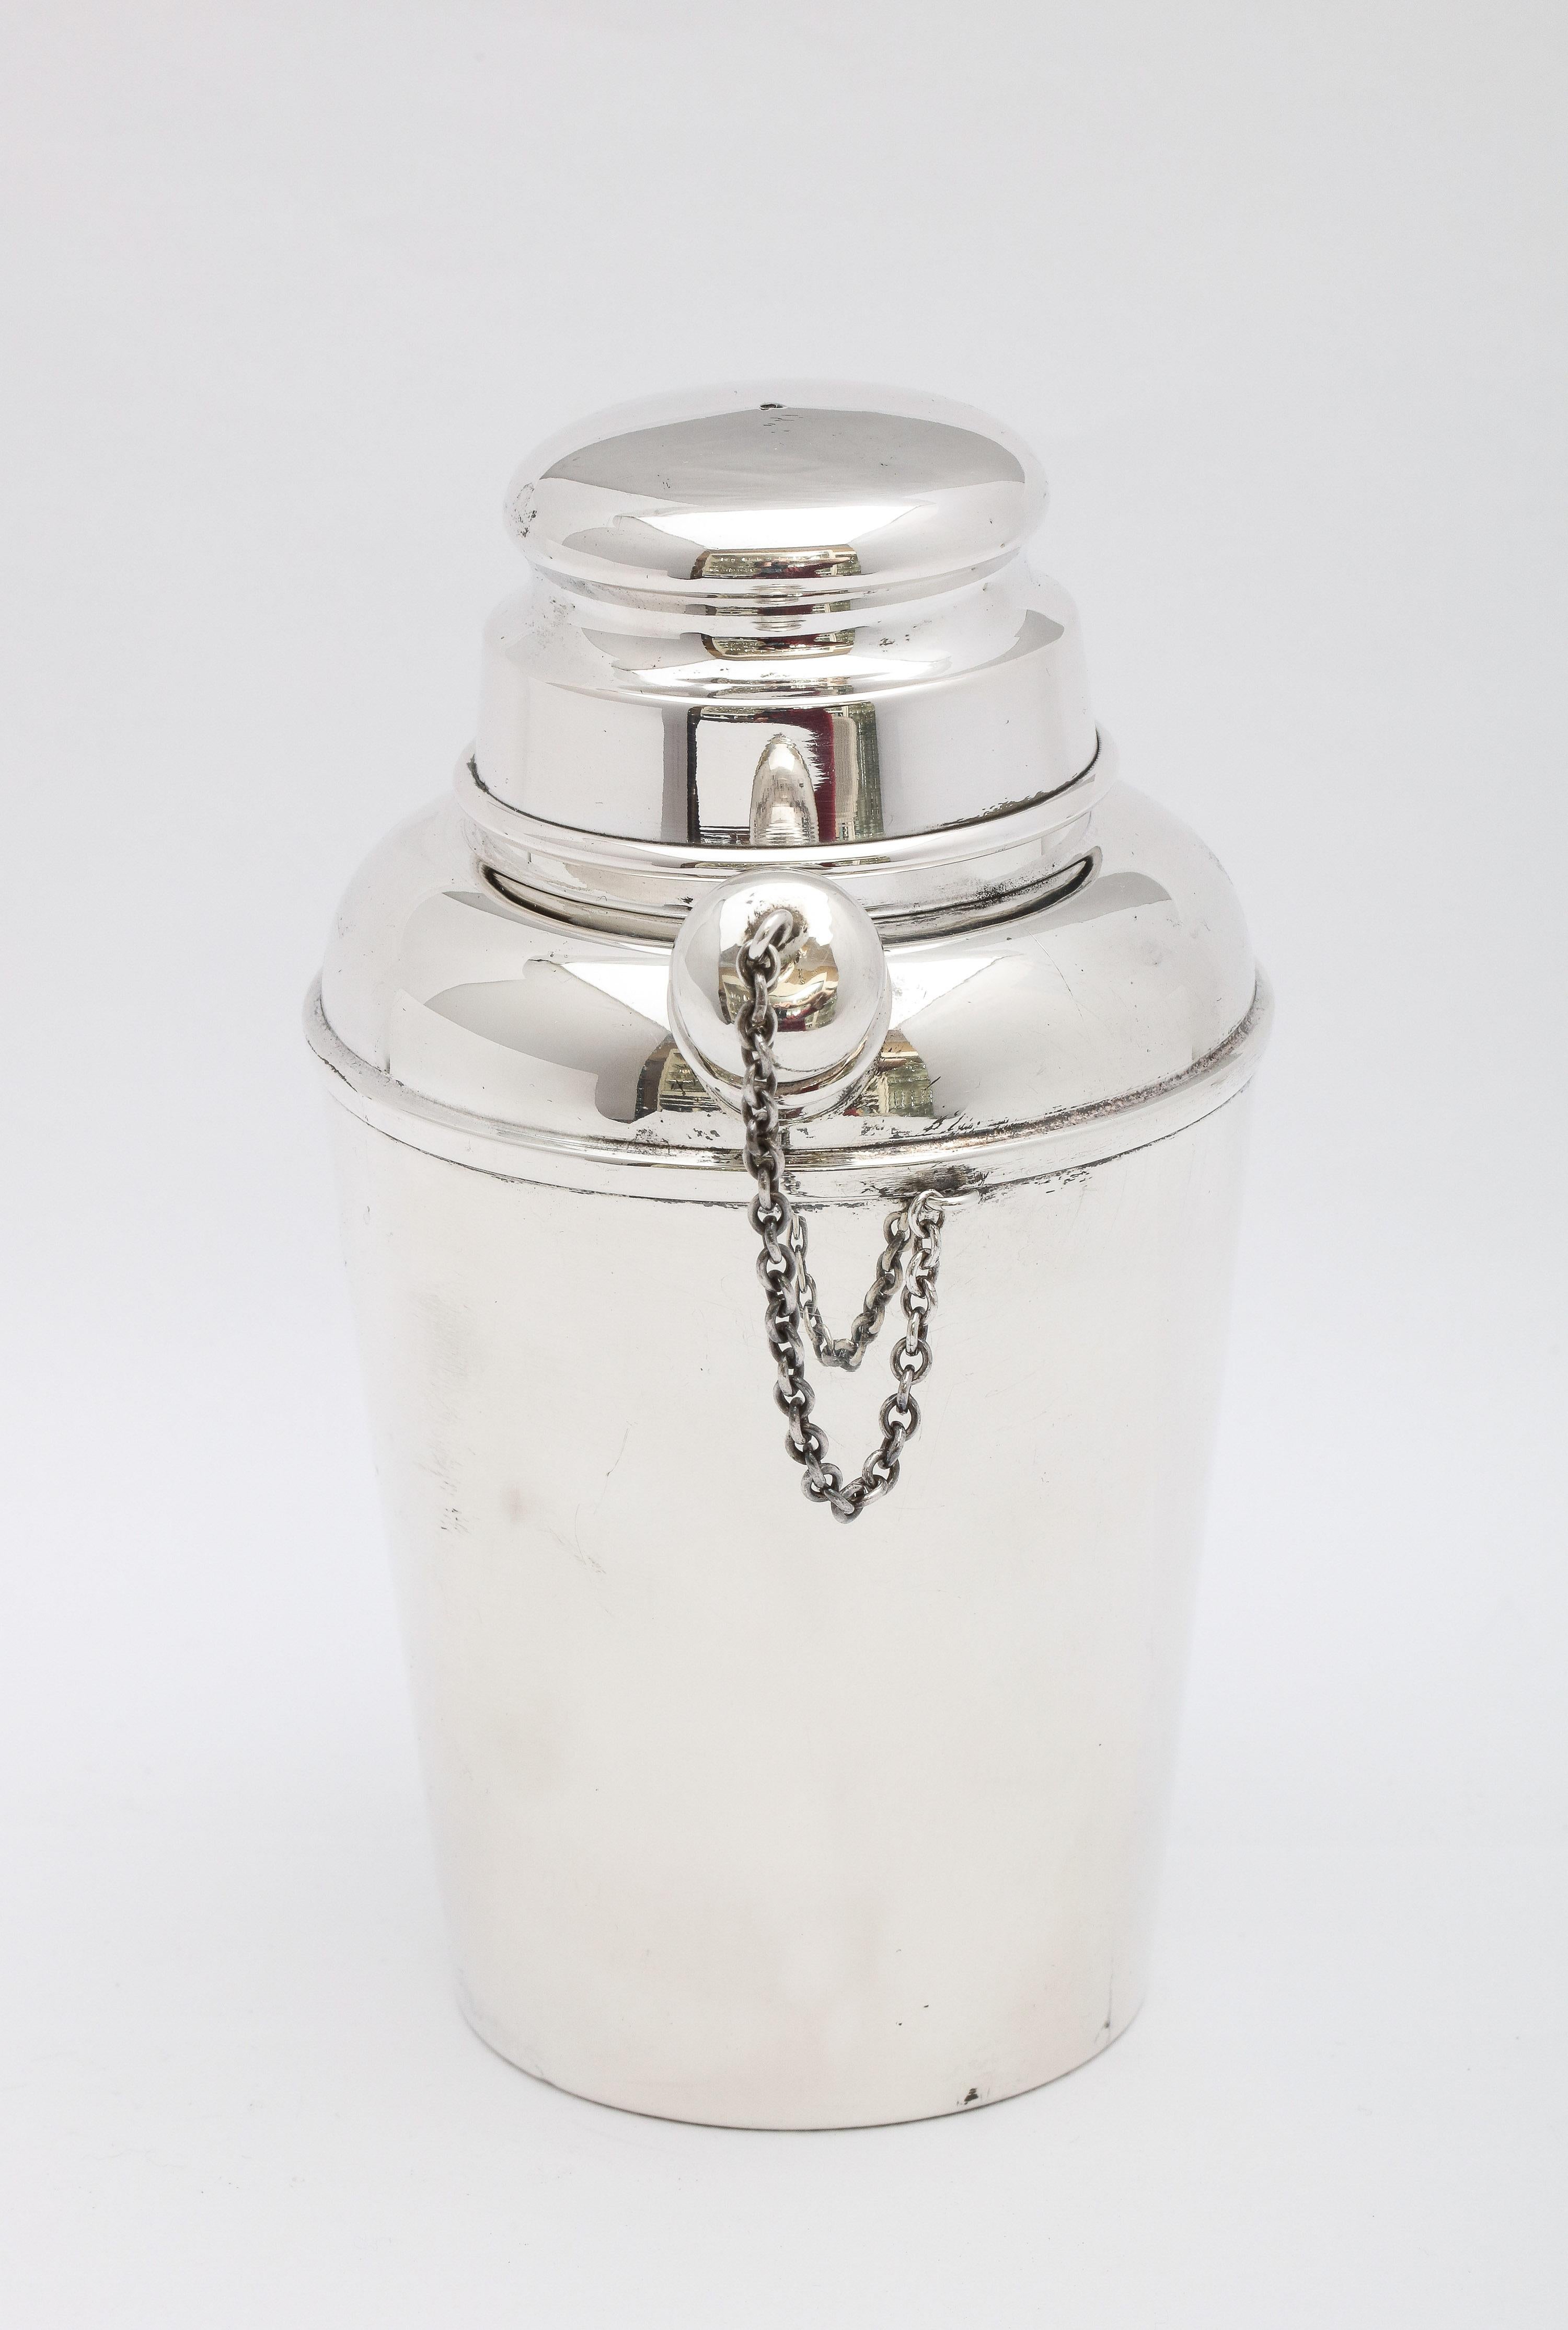 Art Deco Period Sterling Silver Cocktail Shaker In Good Condition For Sale In New York, NY